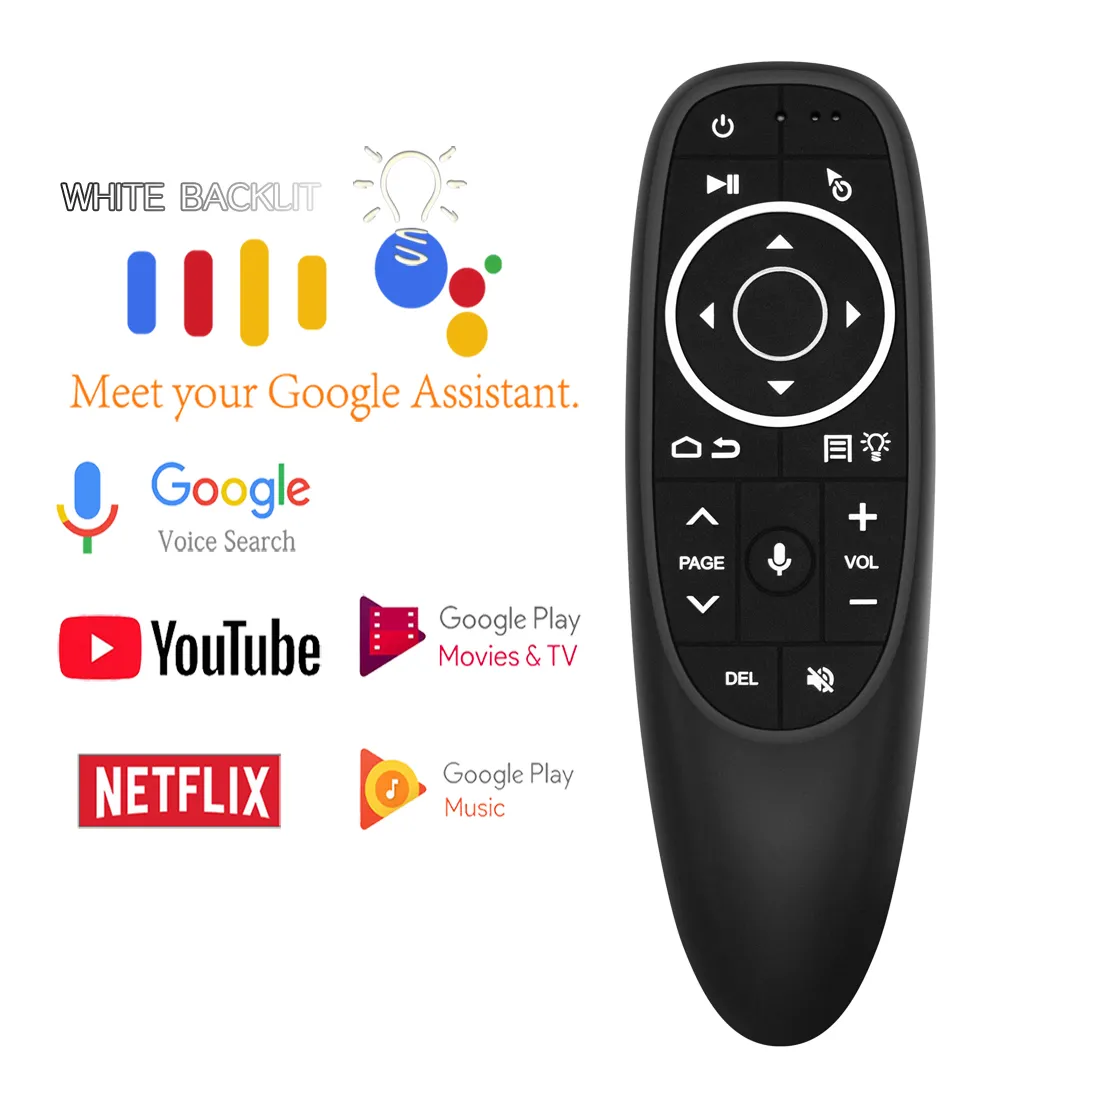 G10S Pro Voice Air Mouse Backlit 2.4GHz Draadloze Google Microfoon Afstandsbediening IR Leren 6-Axis Gyroscoop voor Android TV Box PC